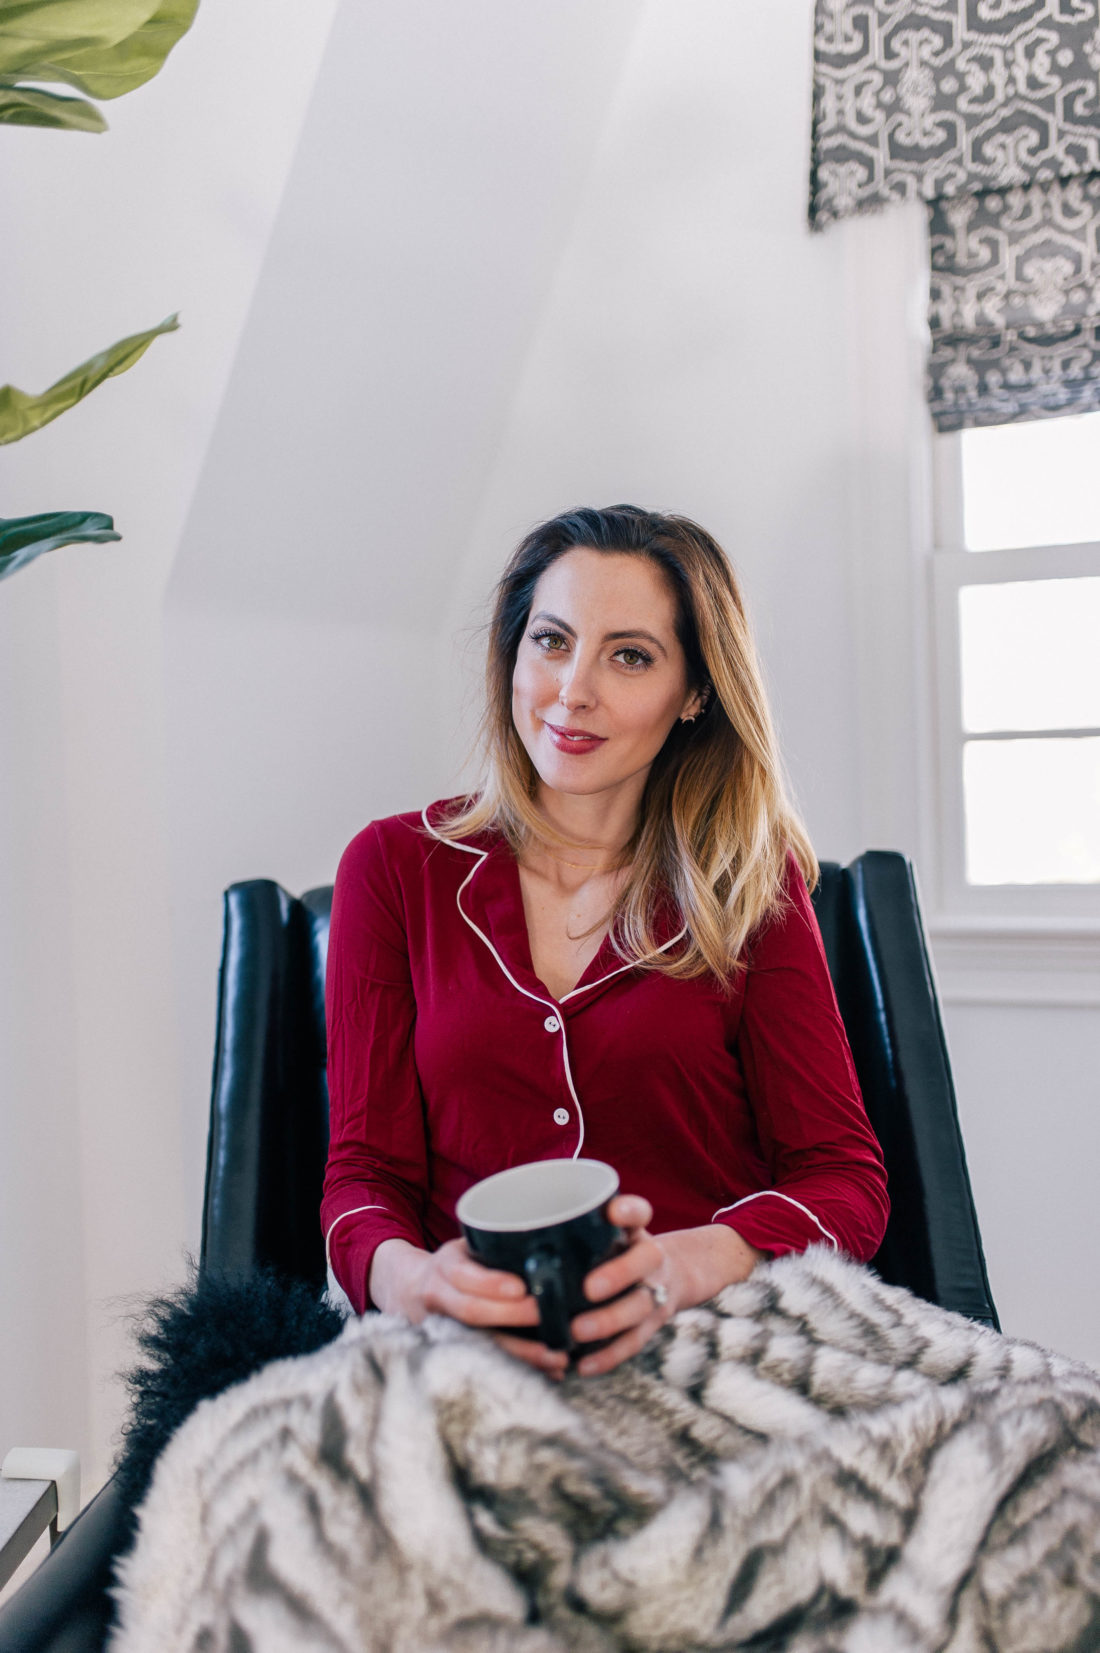 Eva Amurri Martino wears a dark red set of cozy pajamas and curls up on the leather armchair in her master bedroom with a cup of tea